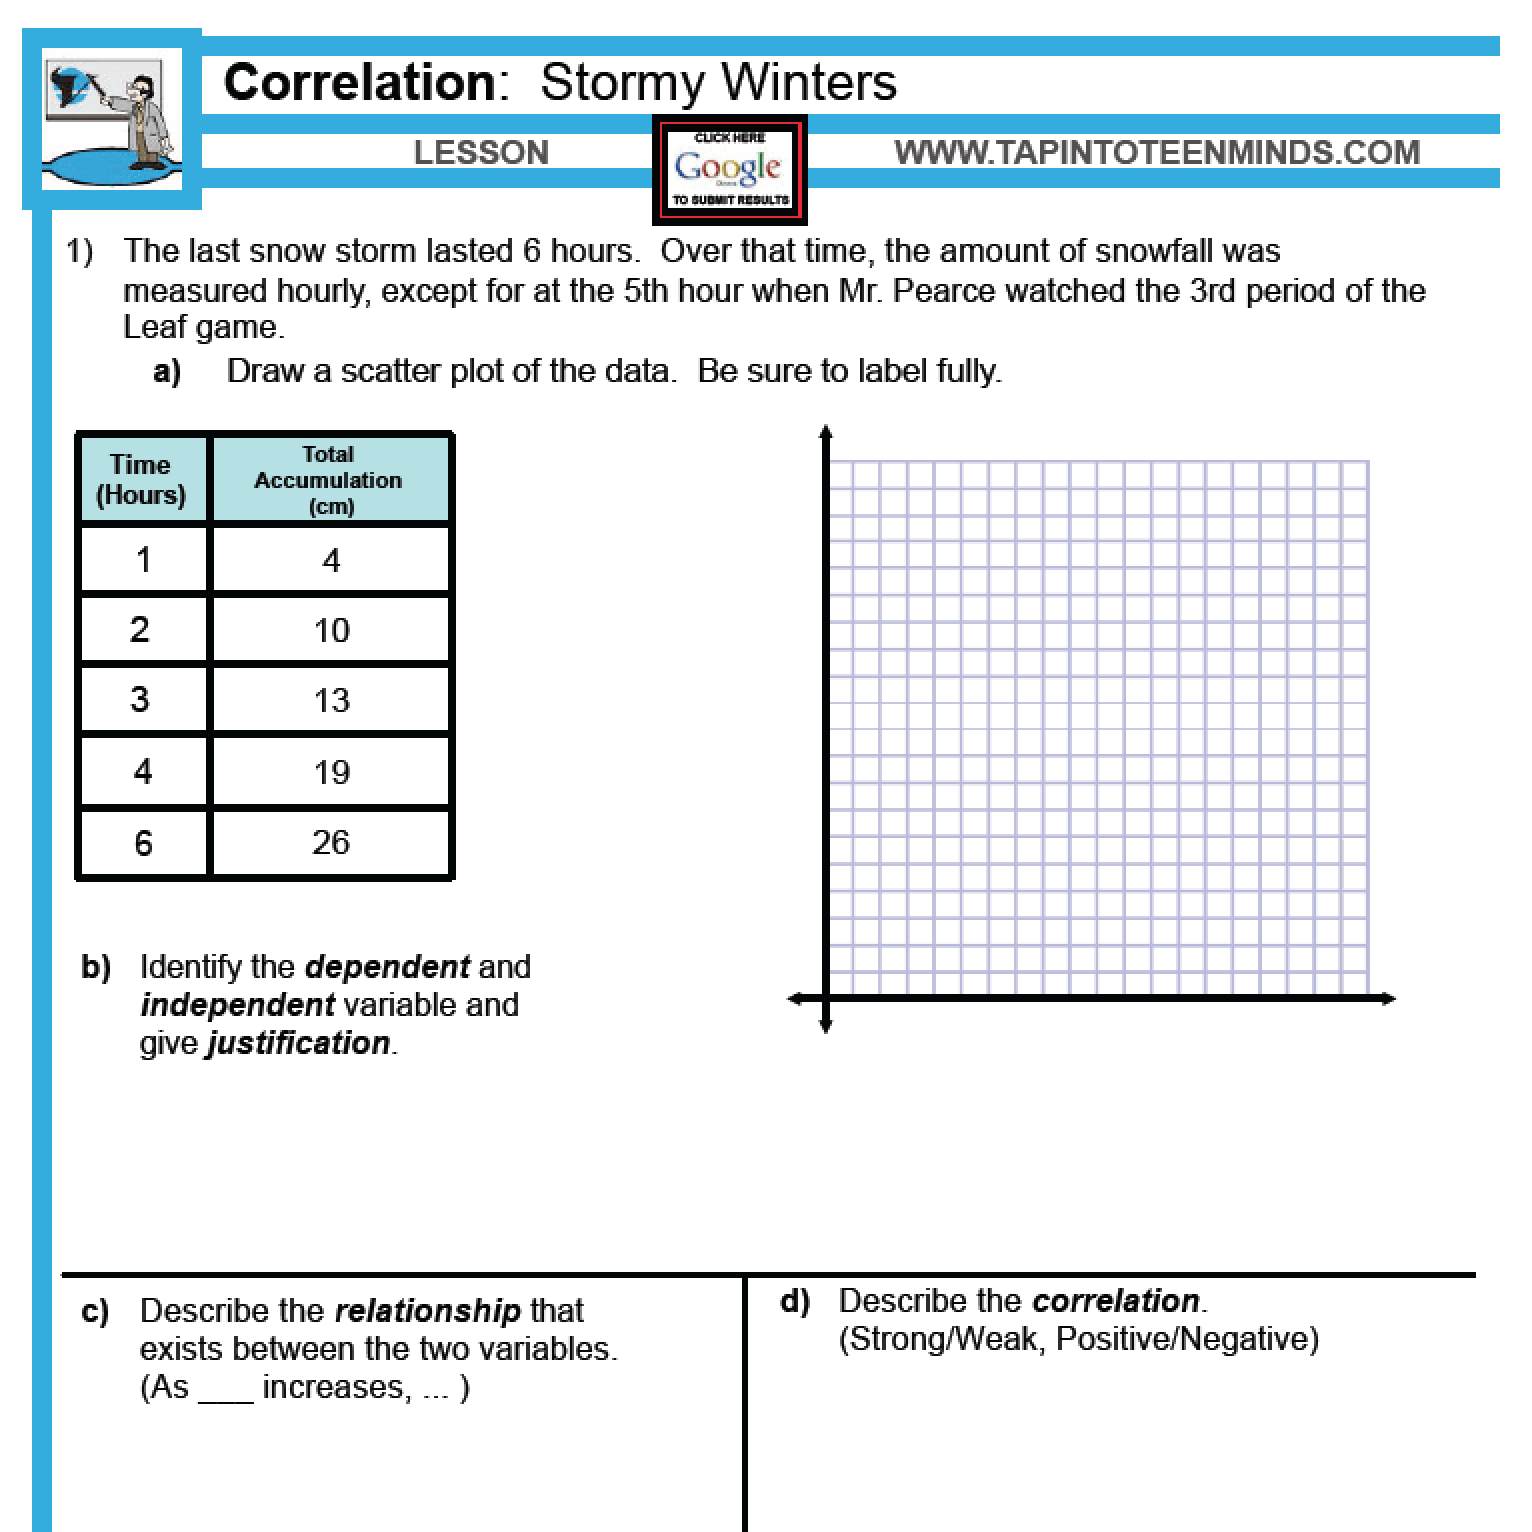 scatter plots and correlations word problems worksheet